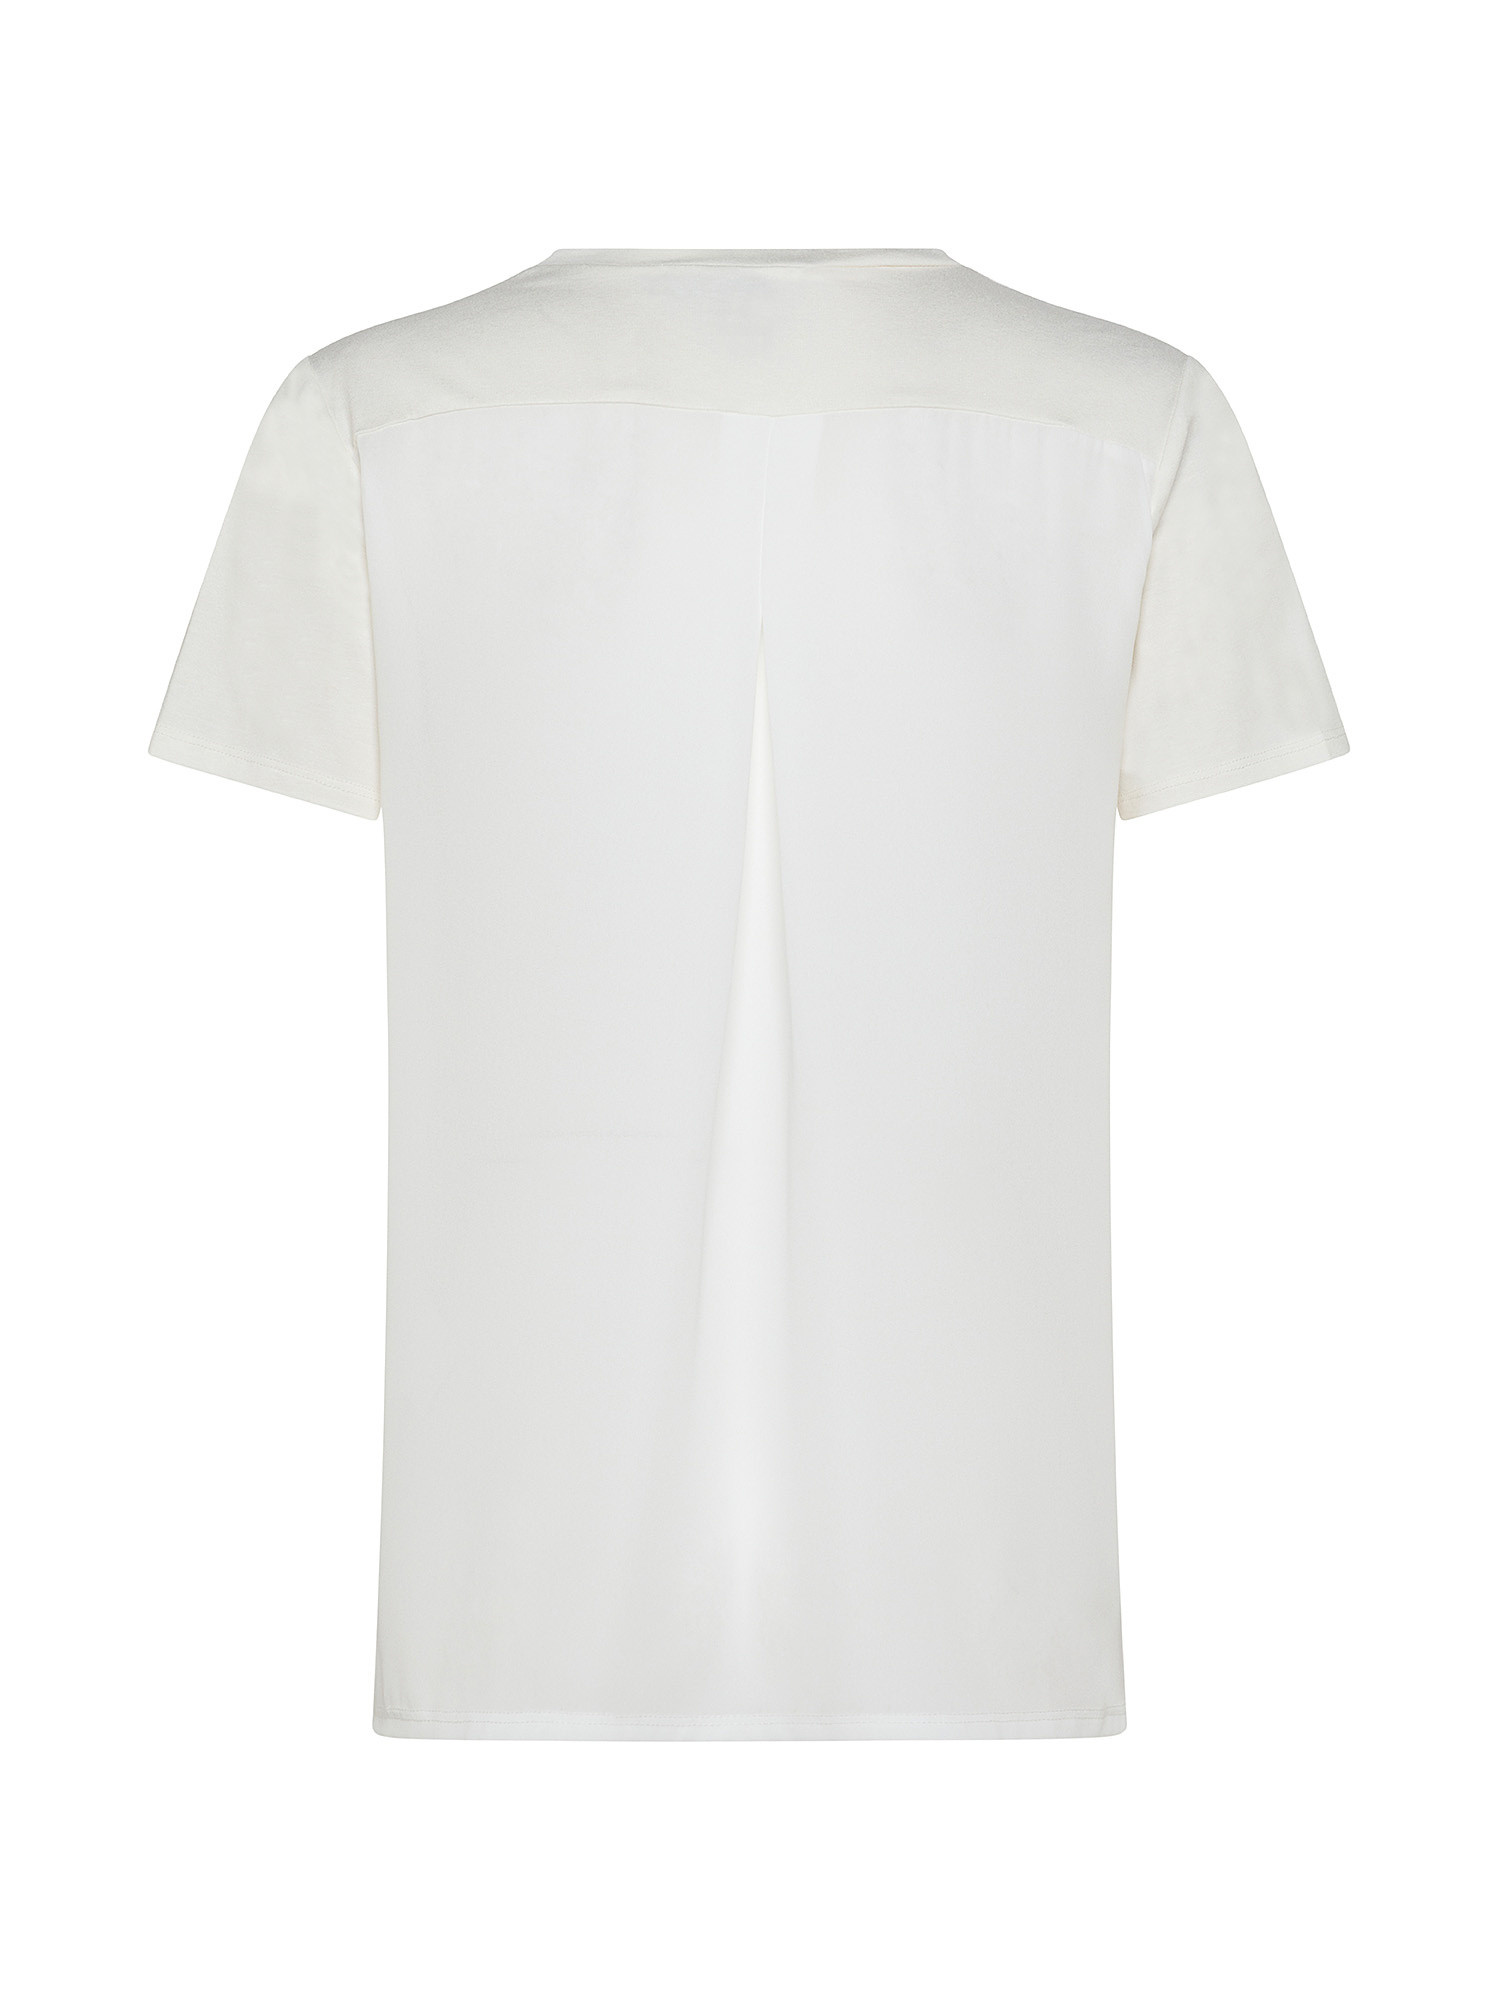 T-shirt with fabric back, White, large image number 1